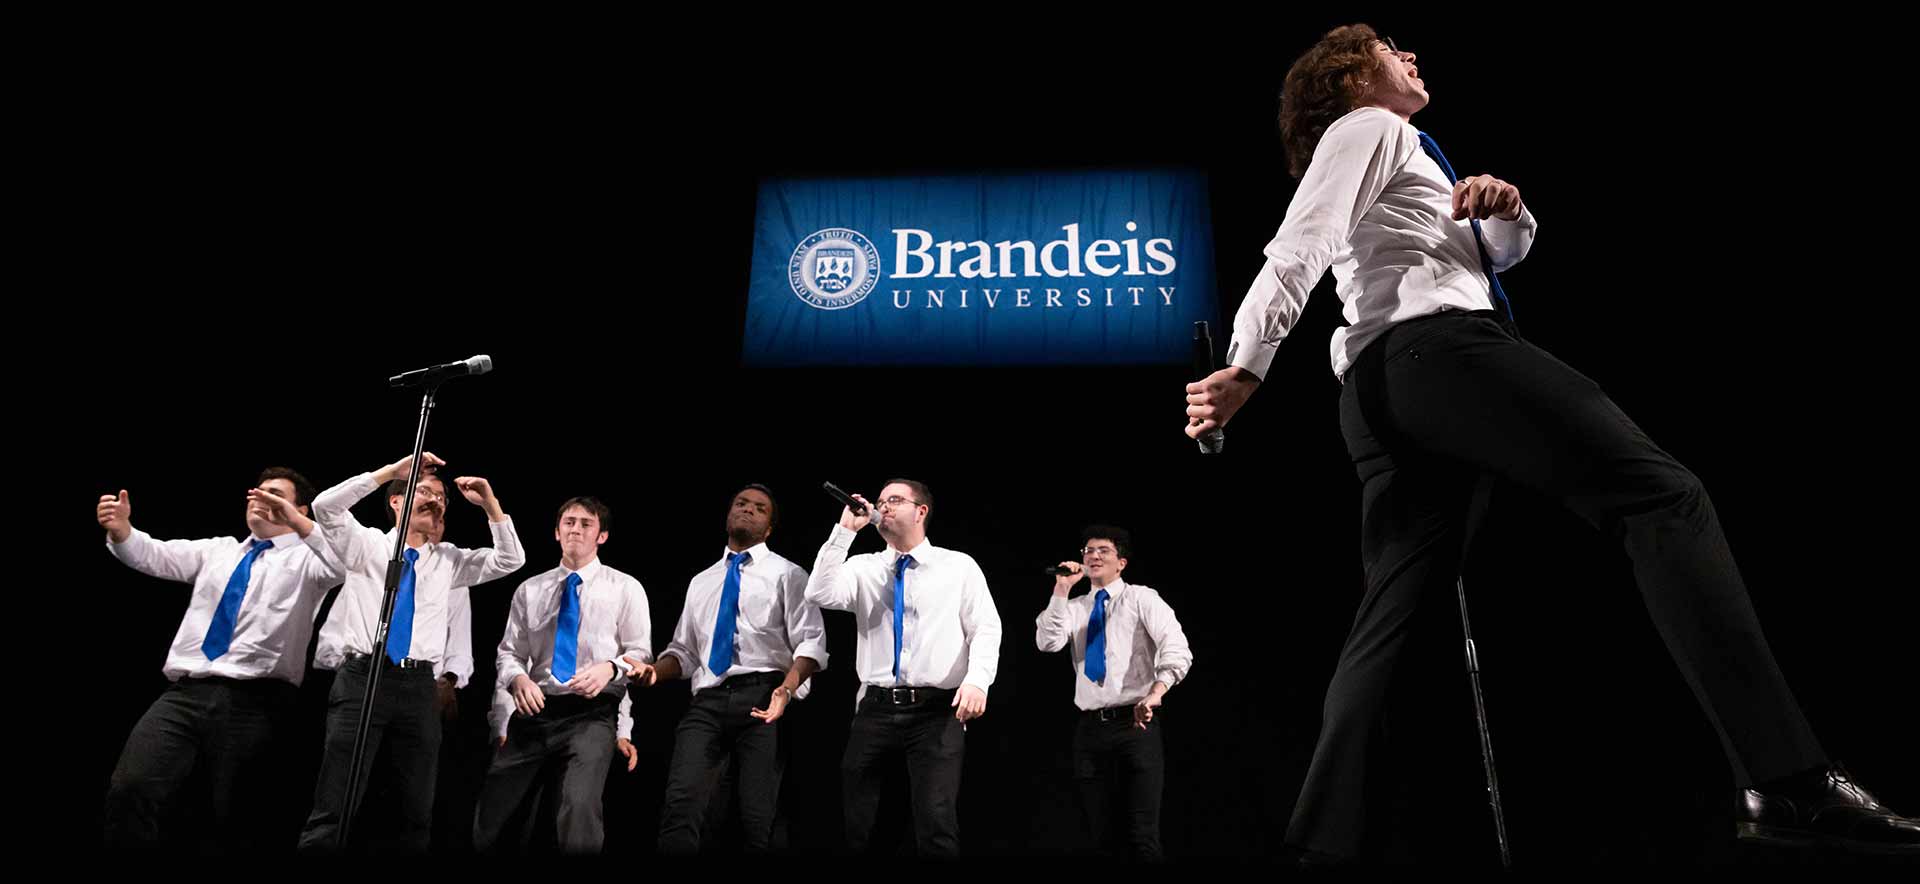 People perform on stage wearing dark pants, white collared shirts and blue ties. A Brandeis banner hangs in the background.